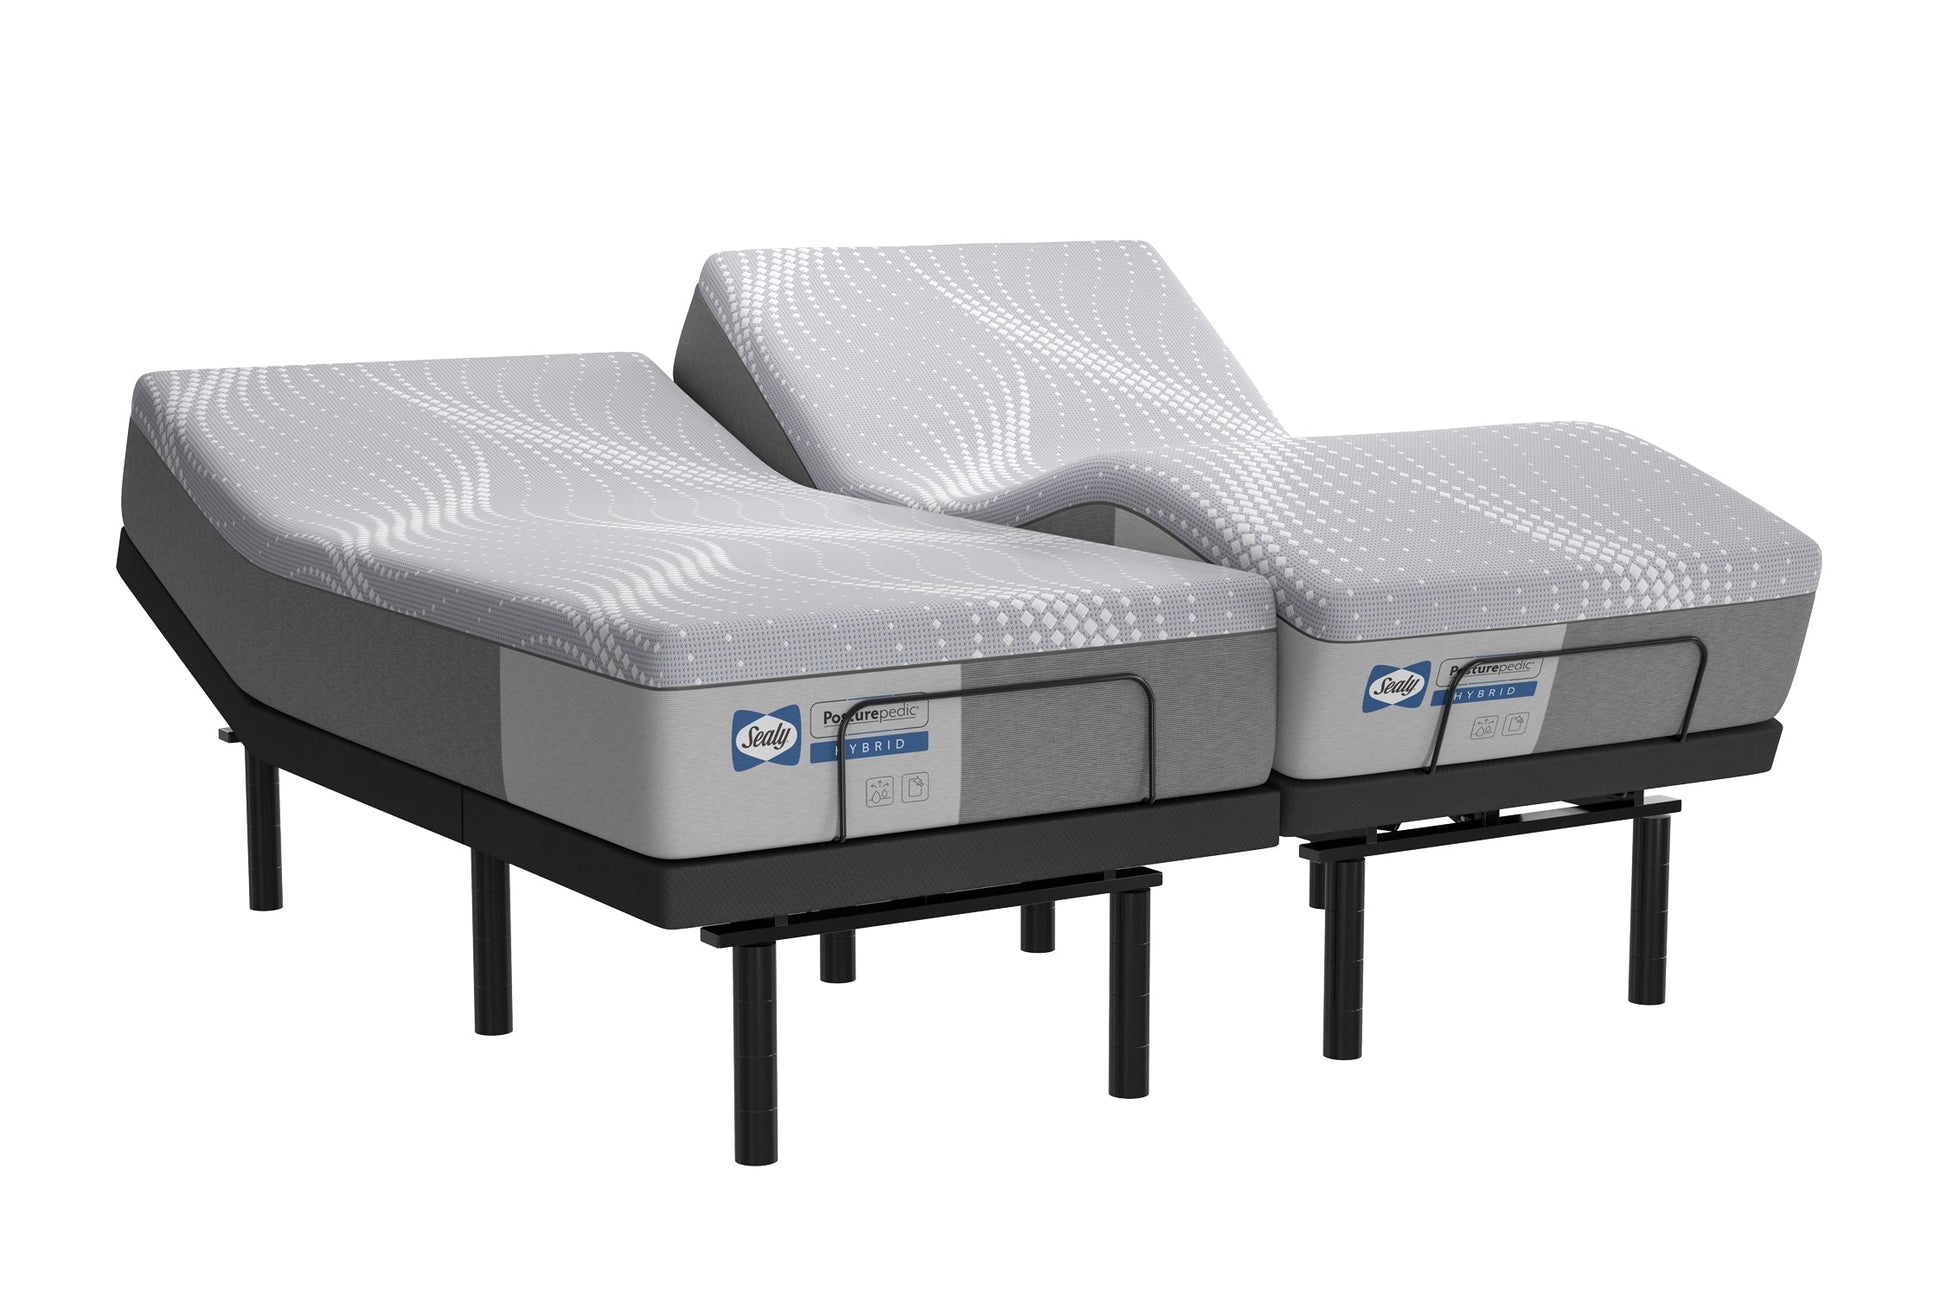 Adjustable Bed Sizes and Dimensions Chart